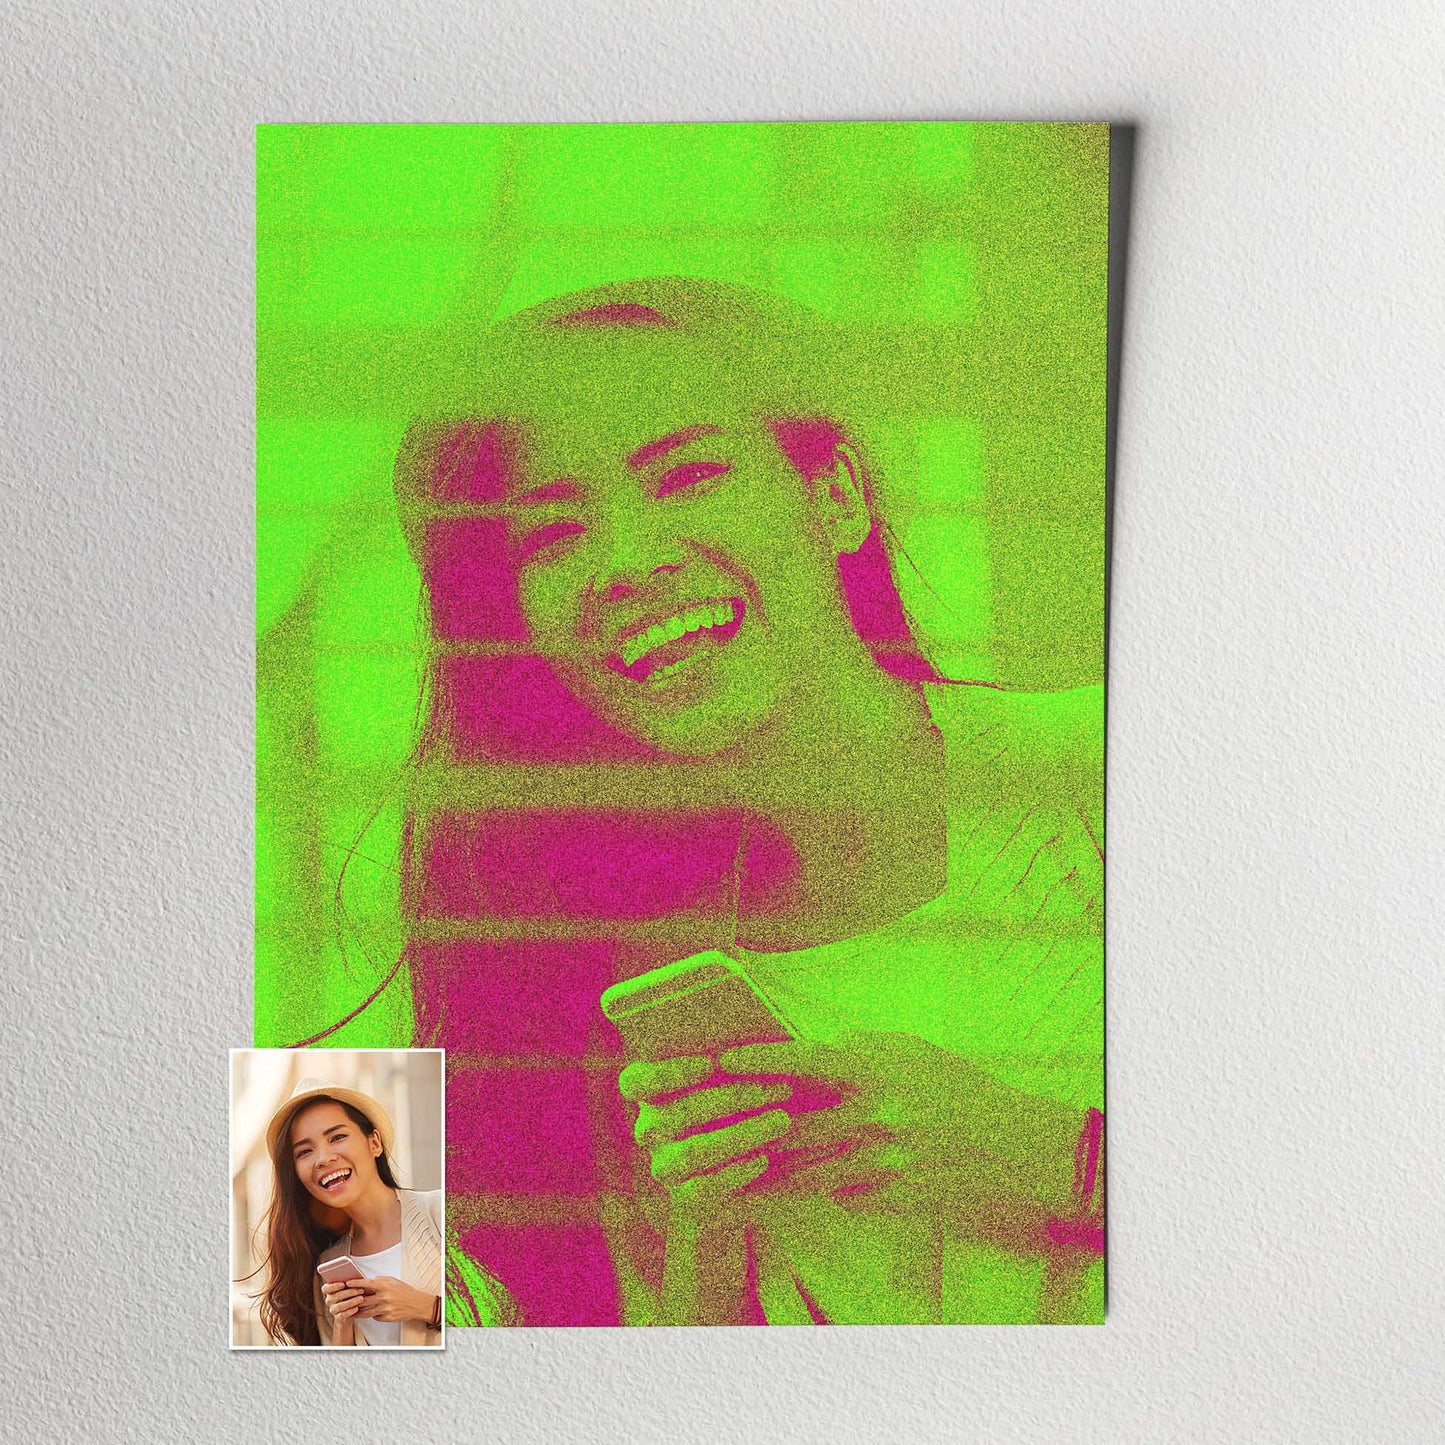 Infuse your space with a burst of creativity and imagination through a Personalised Neon Green Print. The bad print filter effect amplifies the neon green and pink hues, creating a cool and edgy vibe, fun and original wall art